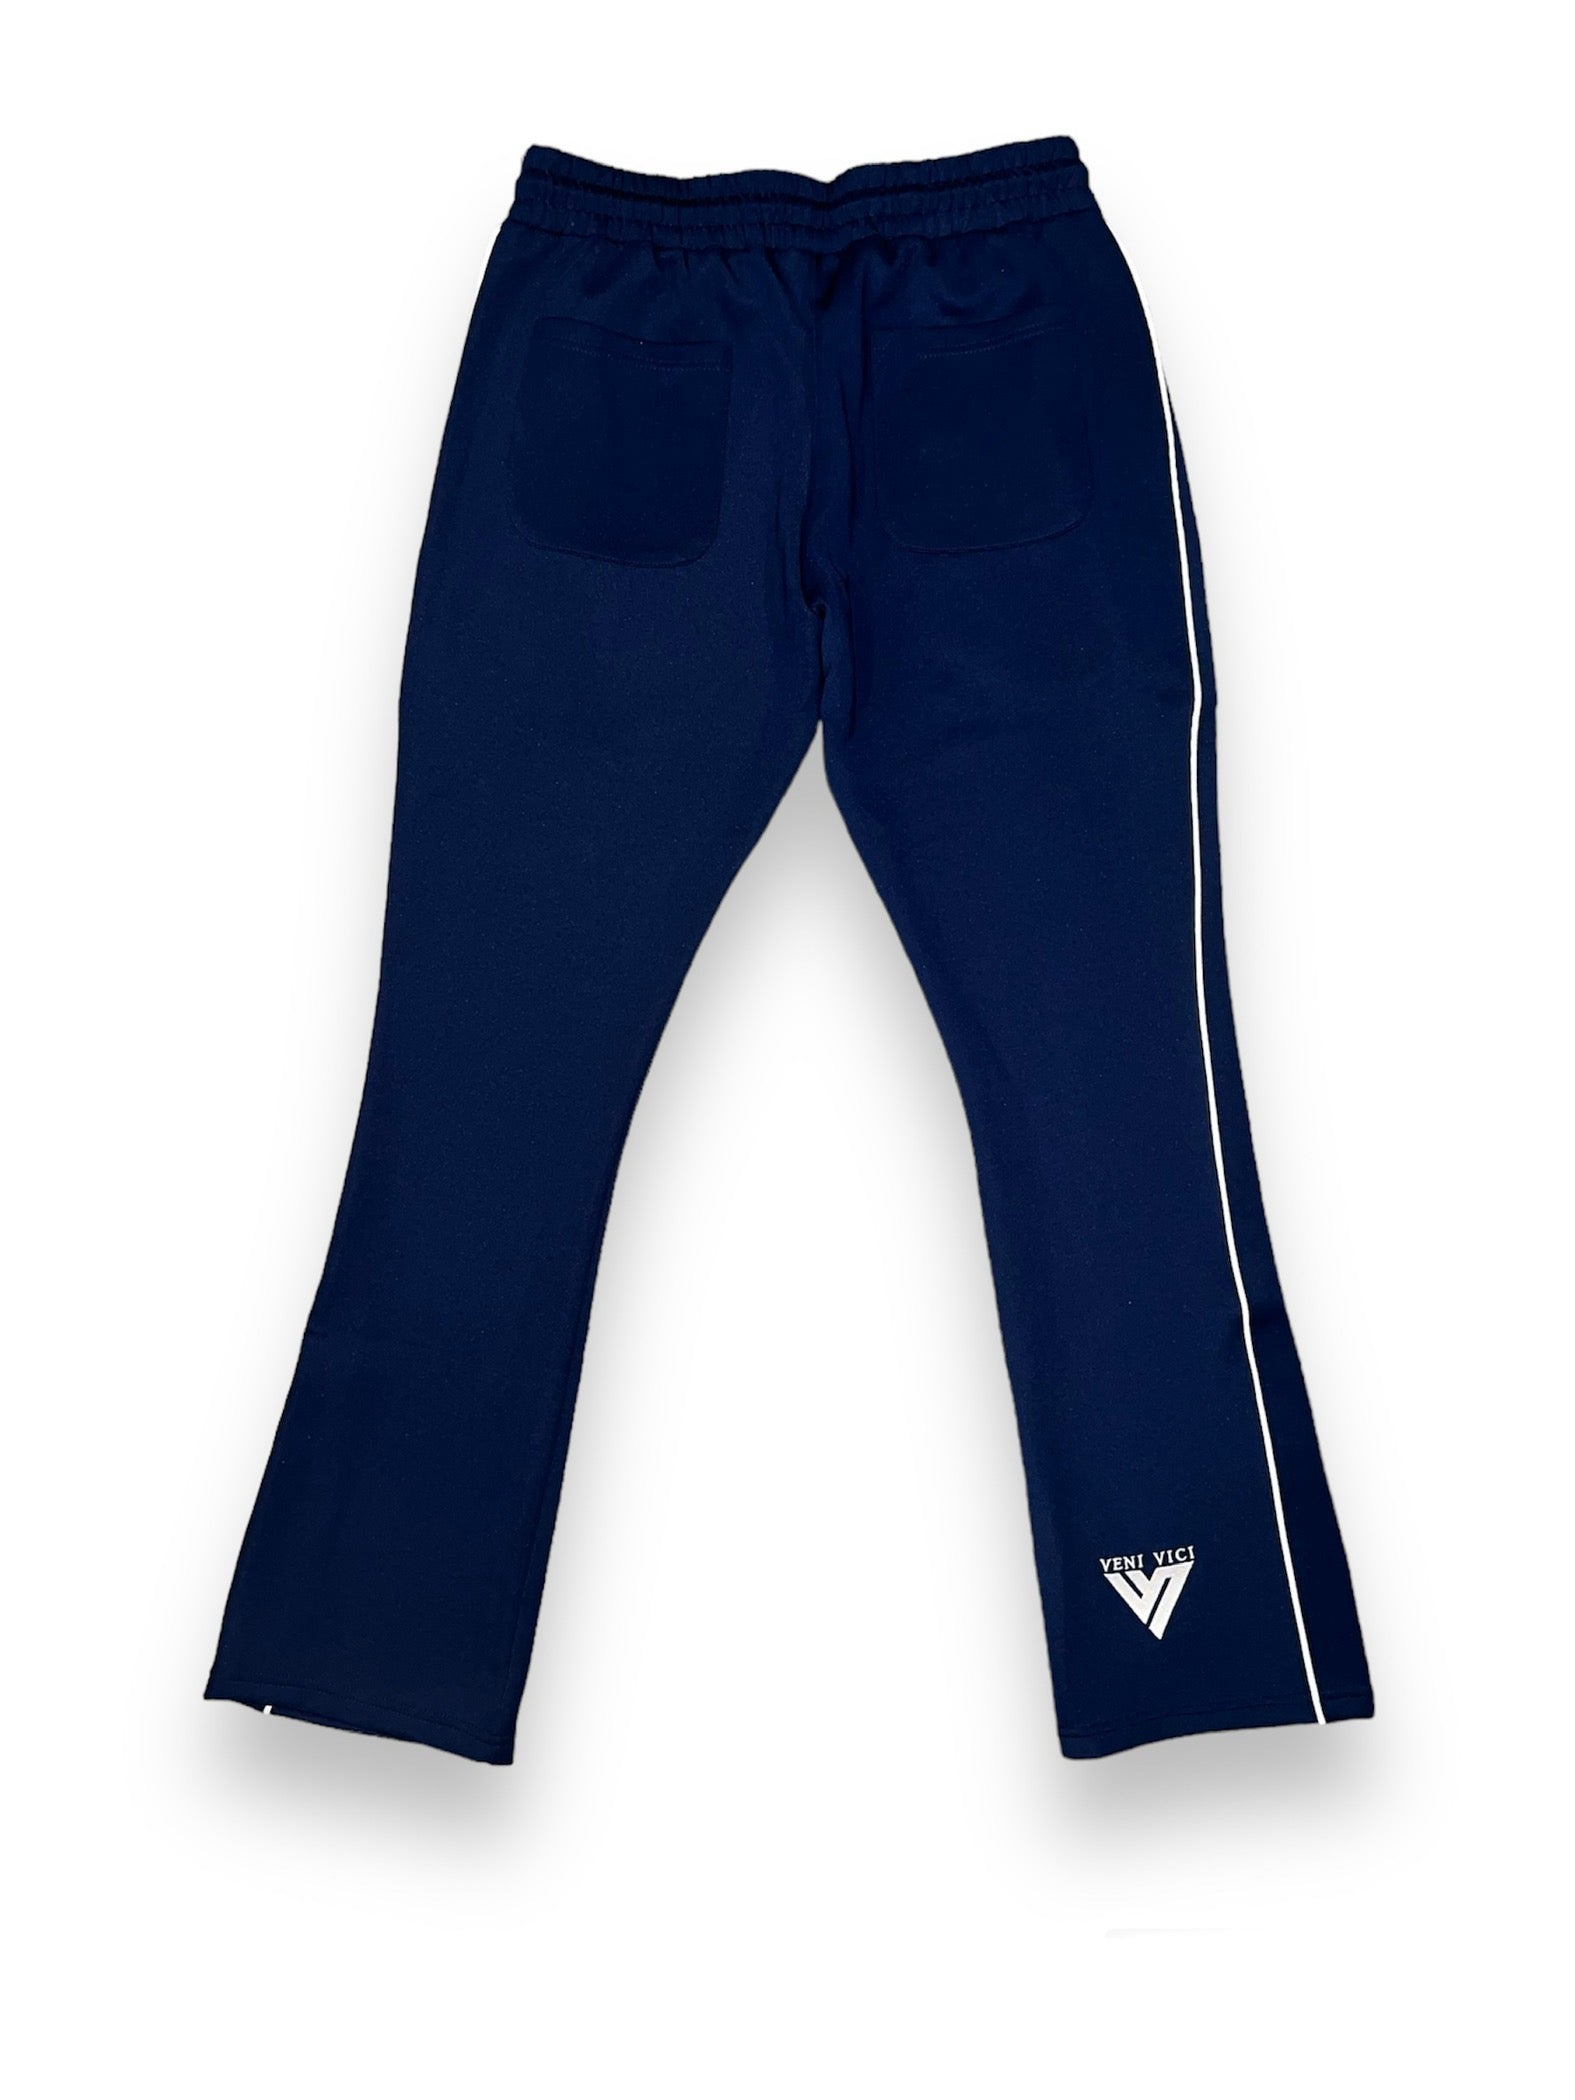 Navy Blue Victory Flare Track Pants